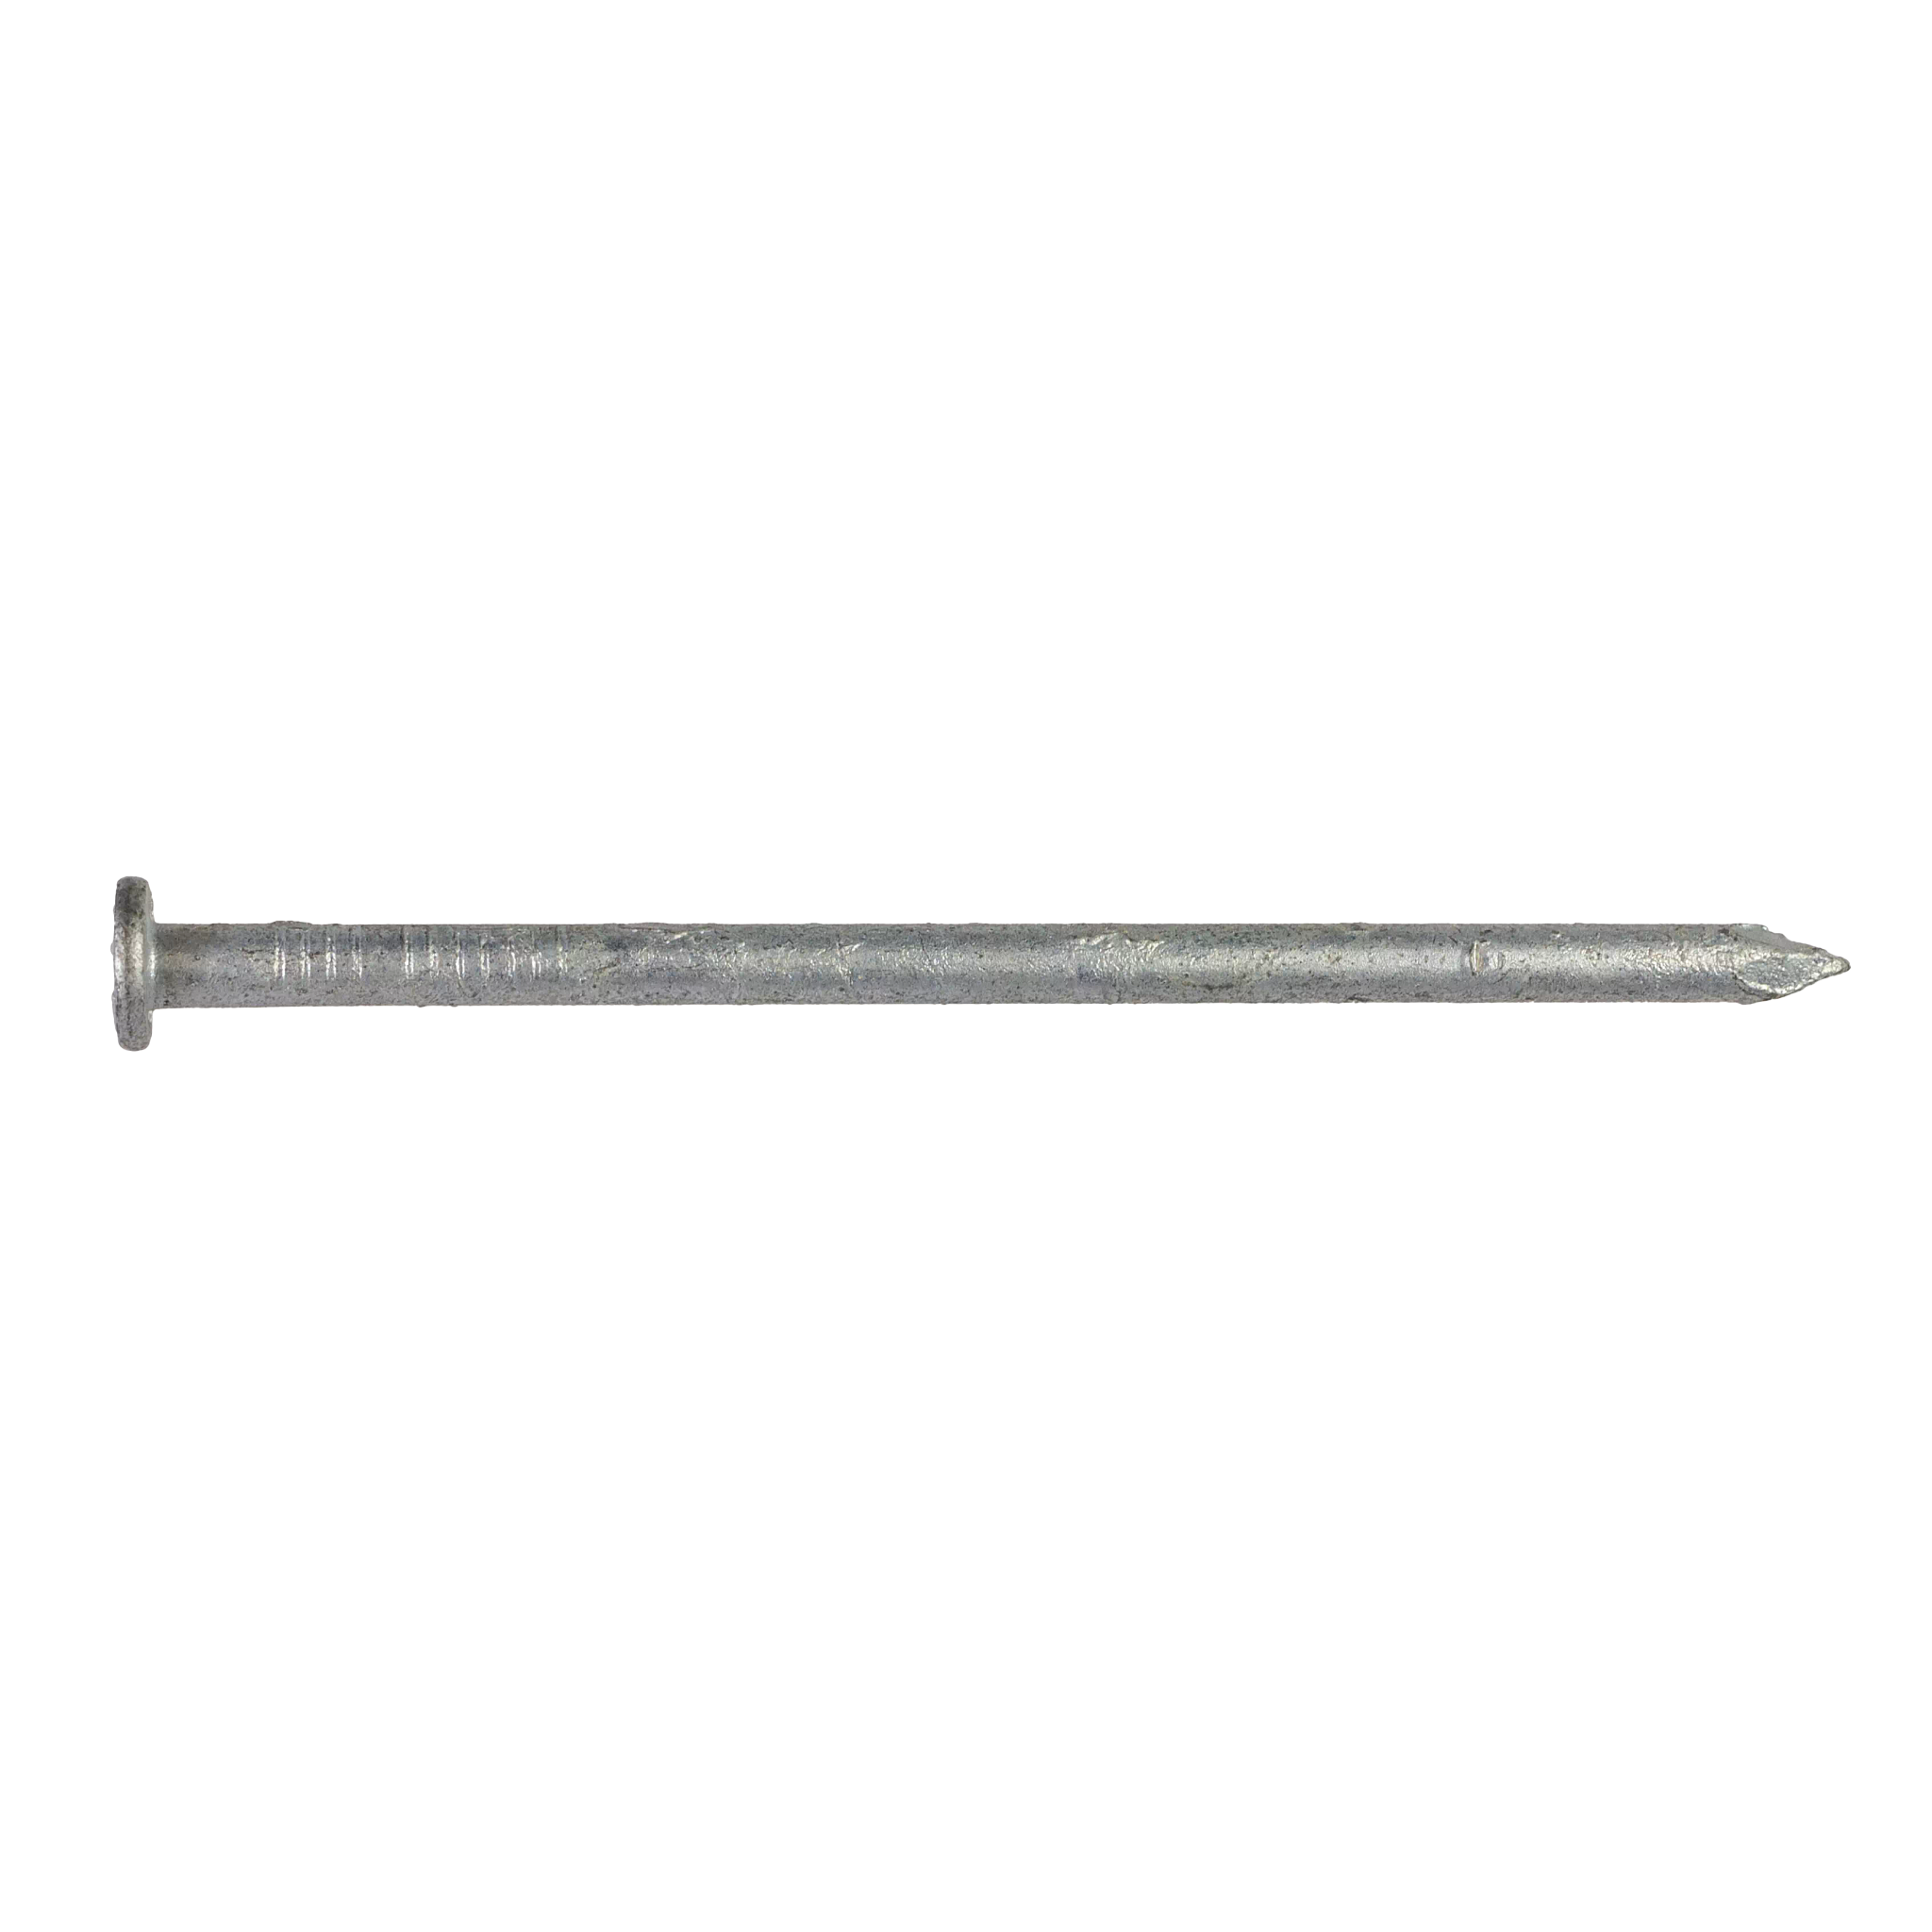 .162"x3-1/2" Strong-Drive® Smooth Shank Connector Nail, Hot Dipped Galvanized (200/BX)